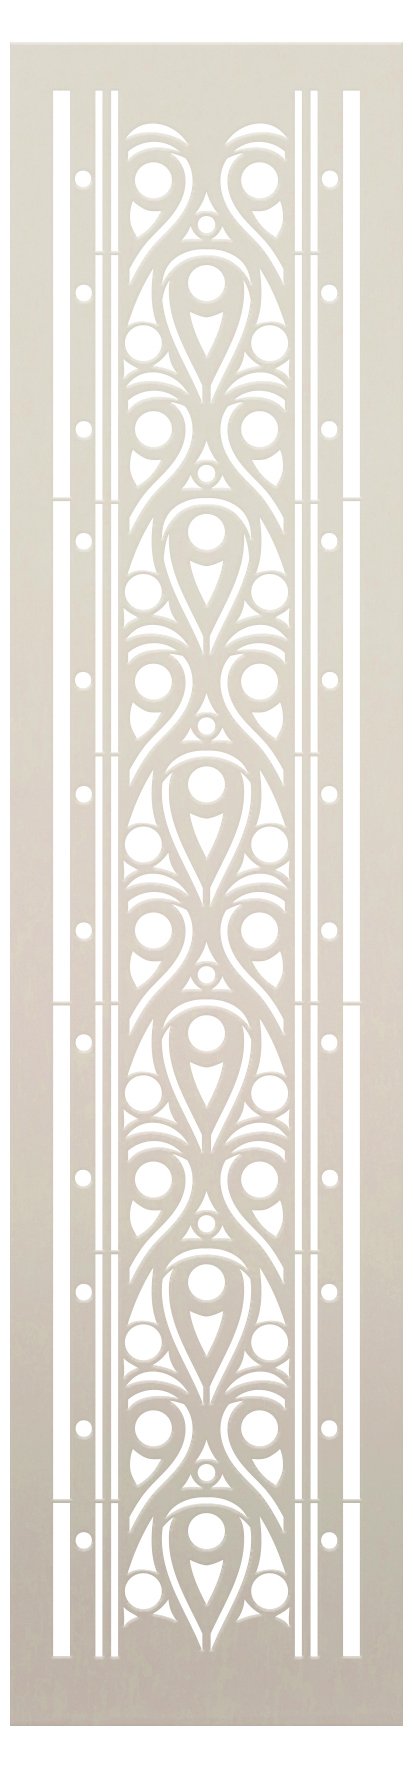 Egyptian Ornamental Water Band Stencil by StudioR12 | Craft DIY Ornamental Pattern Home Decor | Paint Wood Sign | Reusable Template | Select Size | STCL5801